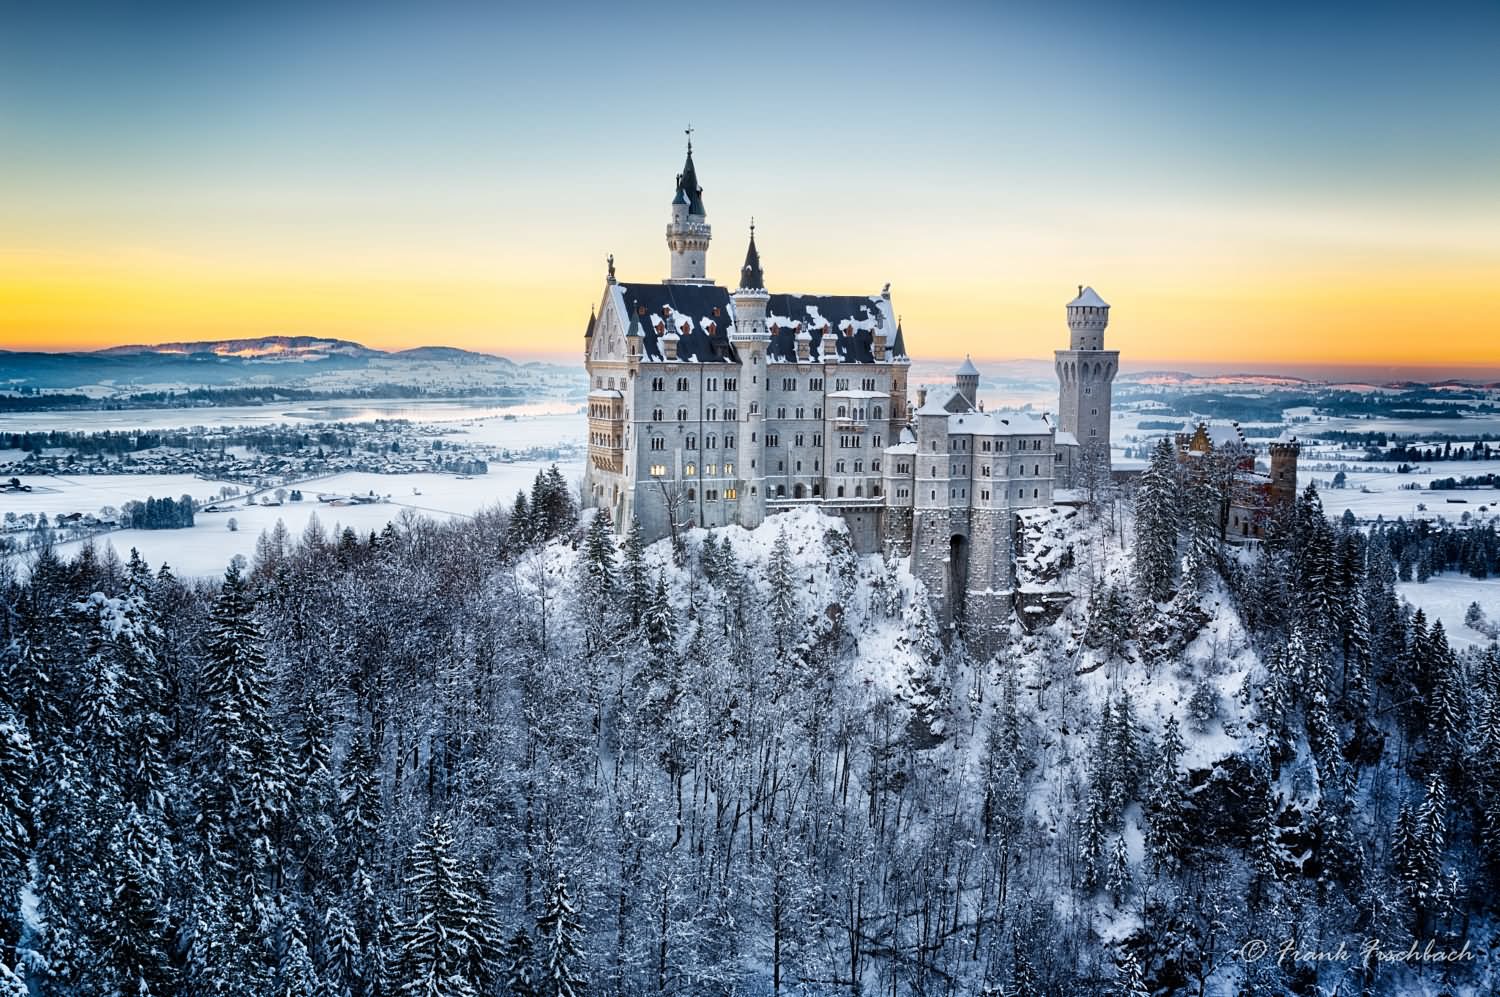 The Neuschwanstein Castle Looks Amazing With Snow During Winters